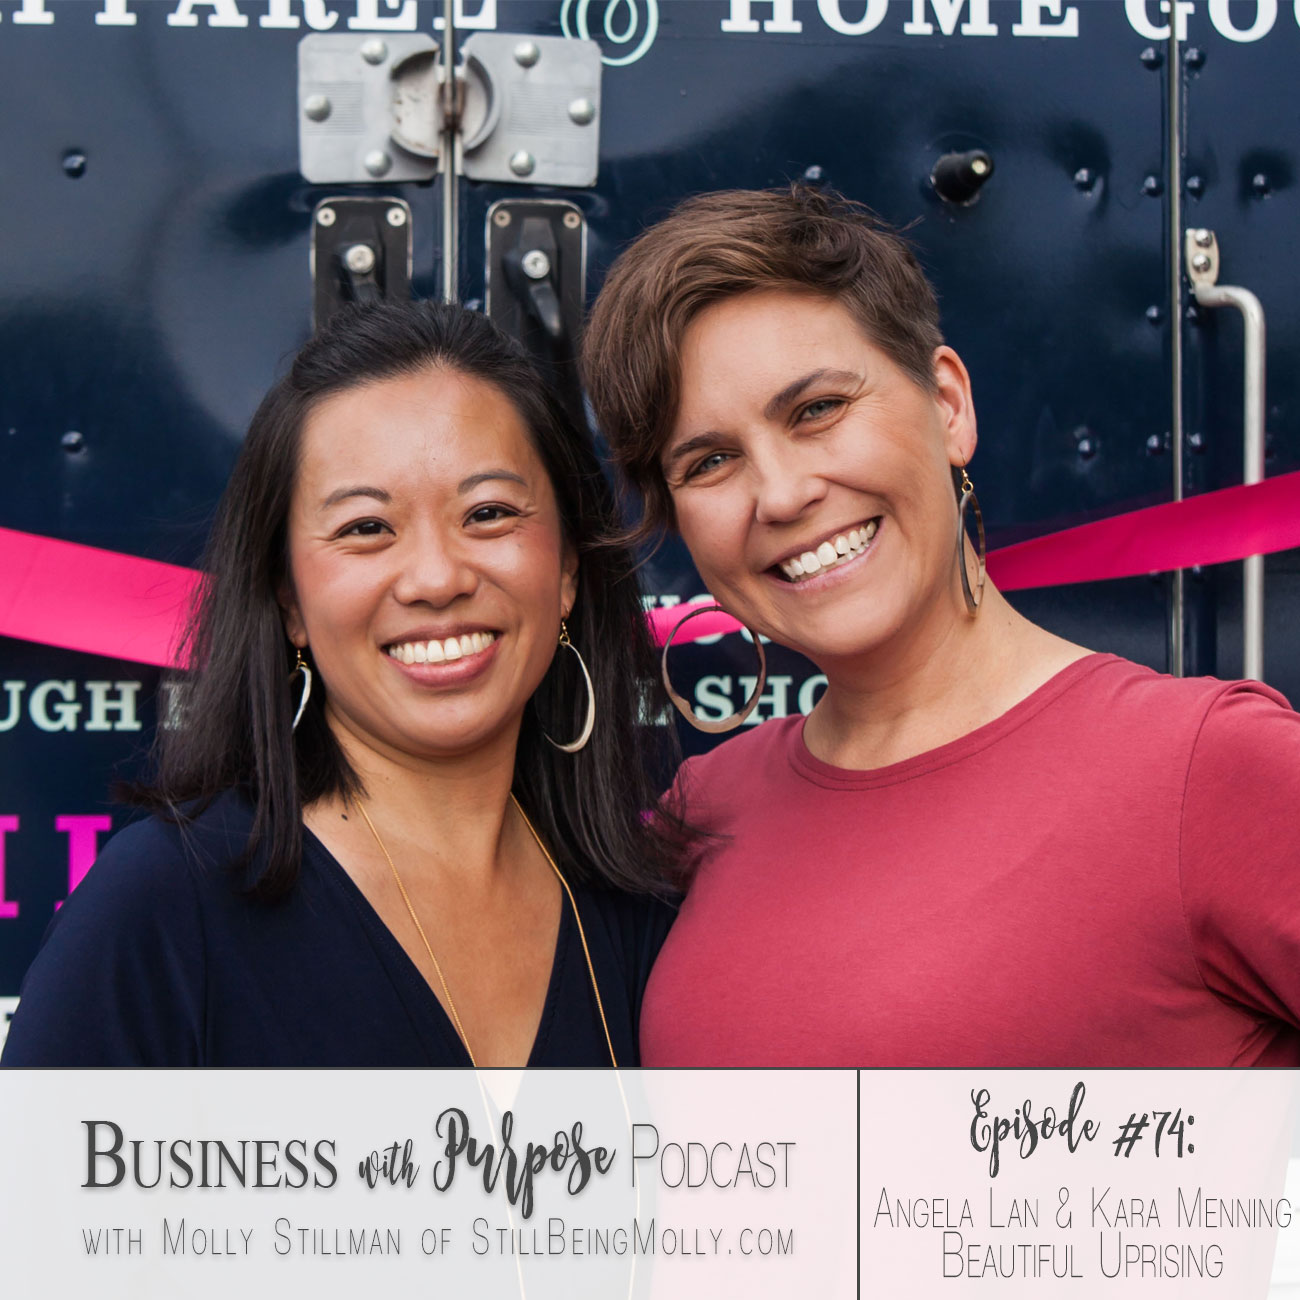 Business with Purpose Podcast EP 74: Angela Lan & Kara Menning, Beautiful Uprising by popular North Carolina ethical fashion blogger and podcaster Still Being Molly